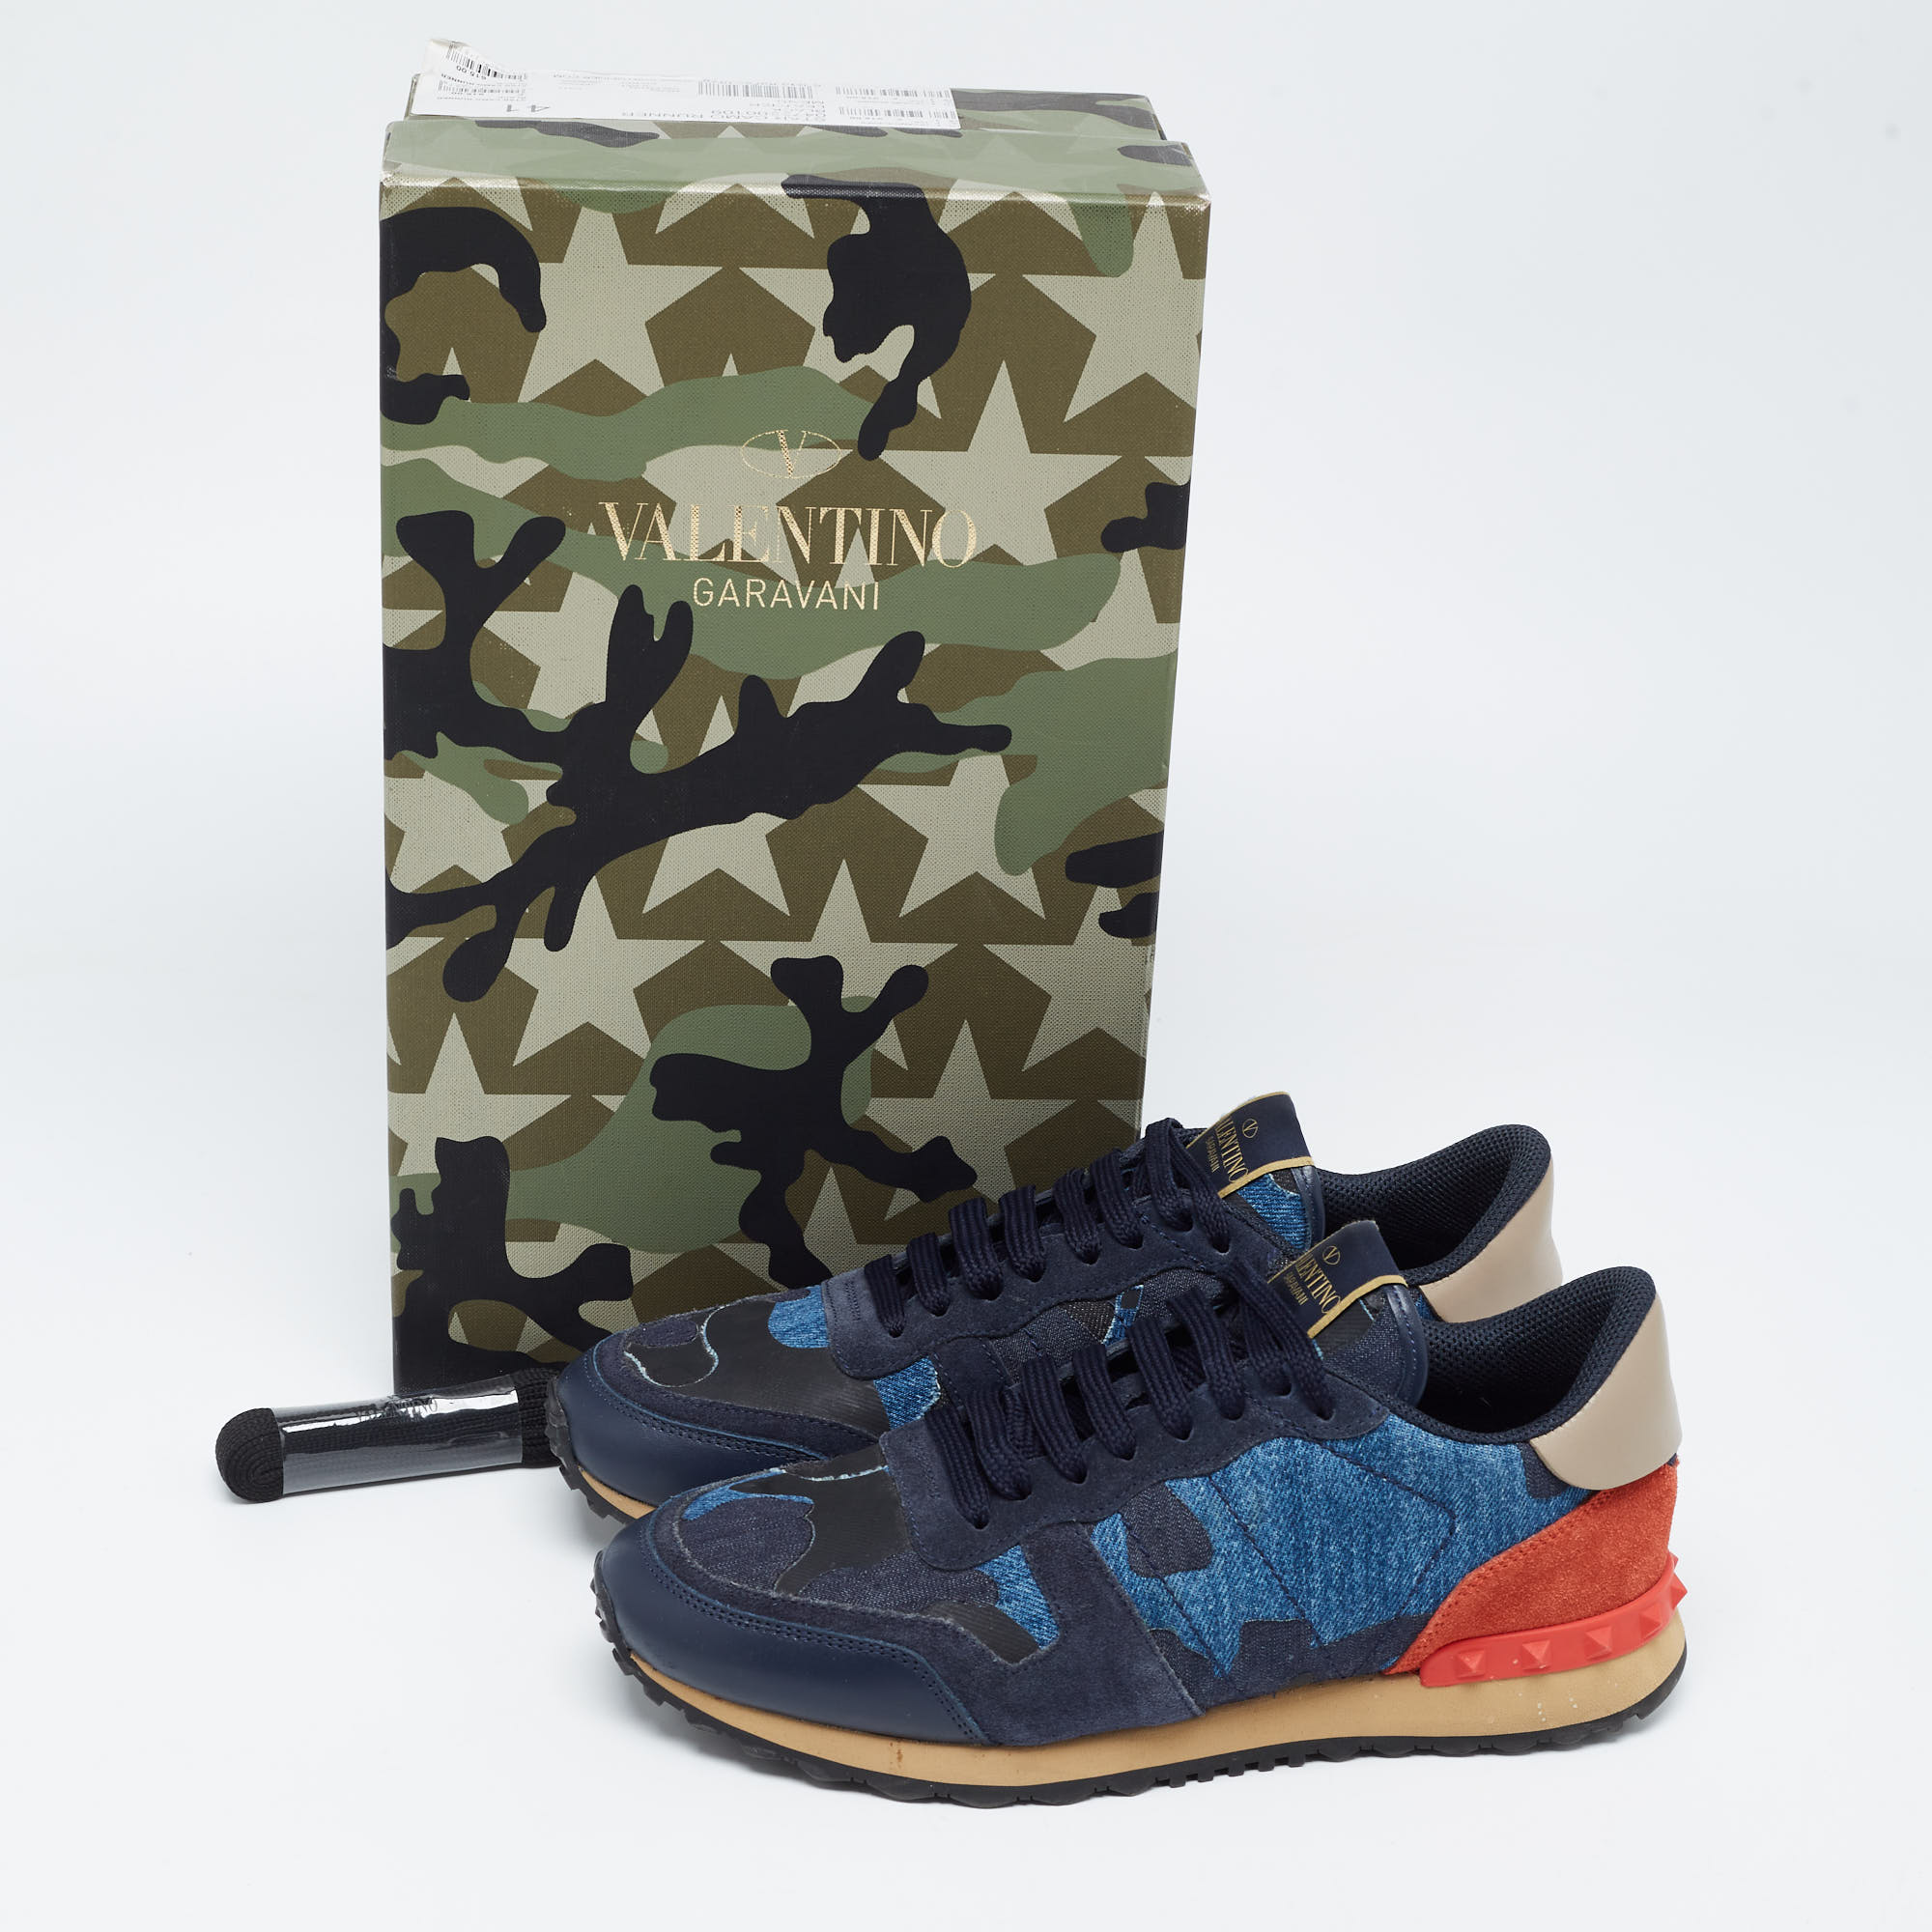 Valentino Multicolor Camouflage Denim And Leather Rockrunner Sneakers Size 41